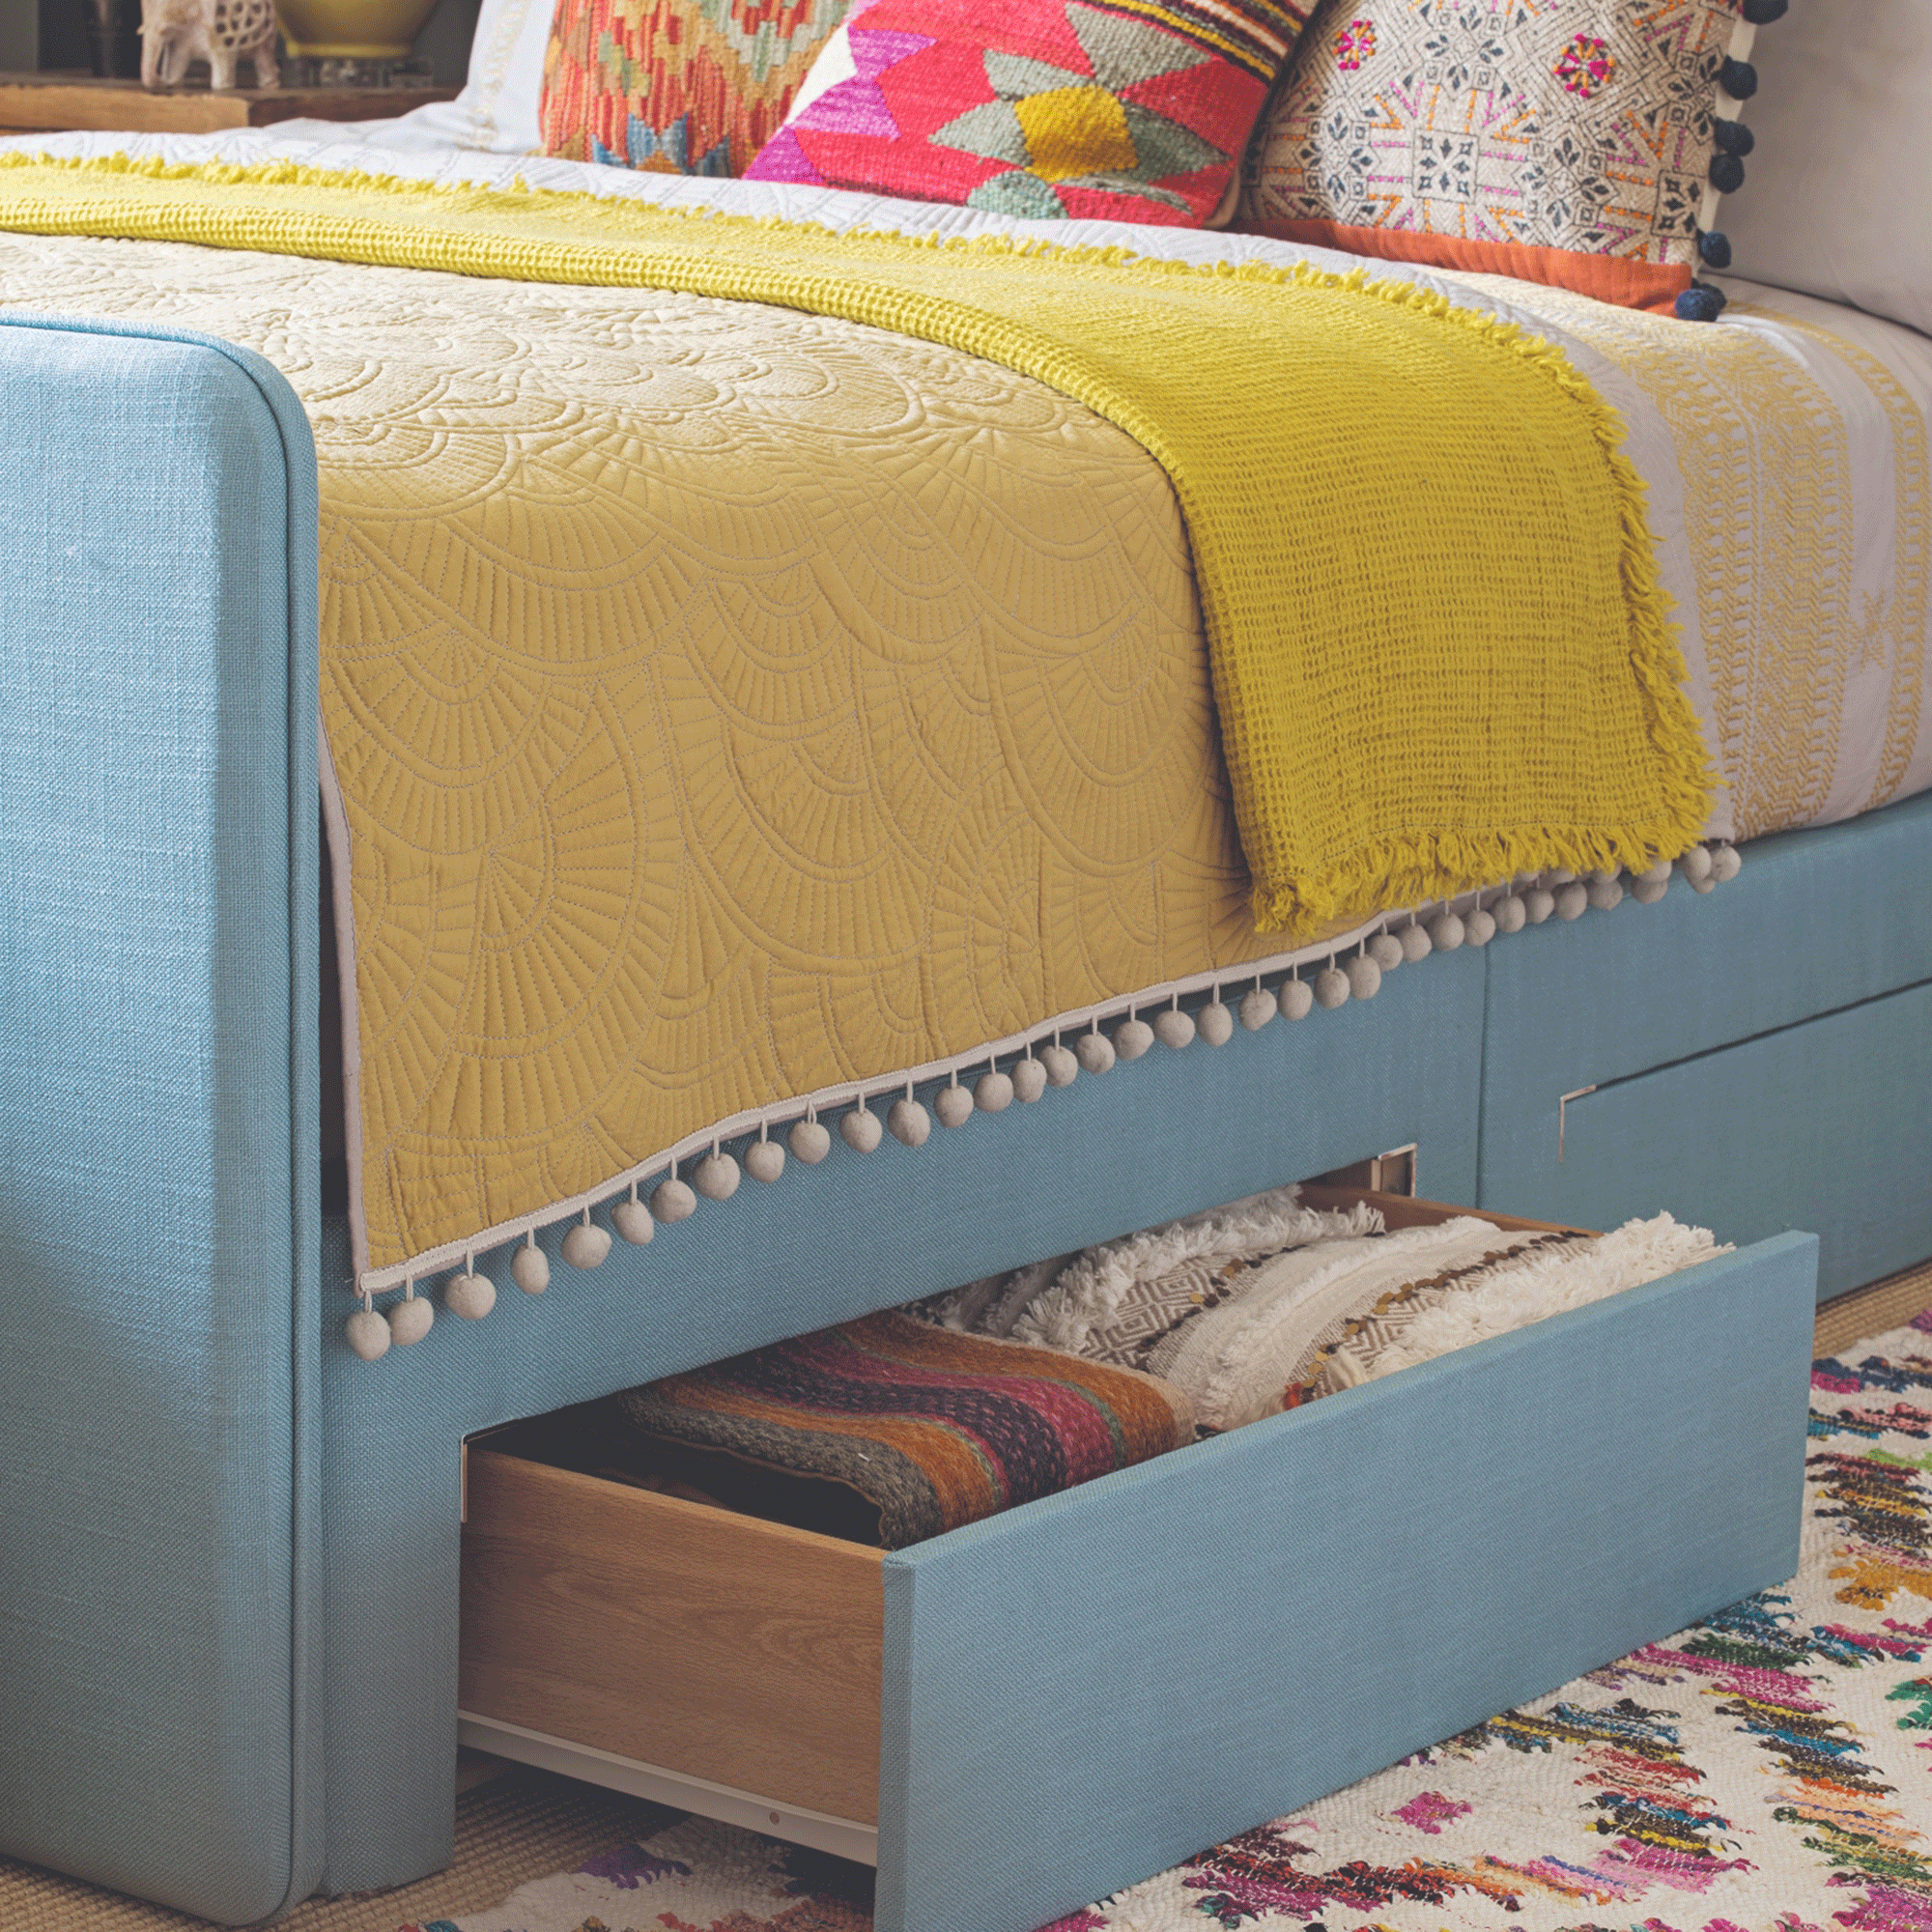 Blue bed with underbed storage